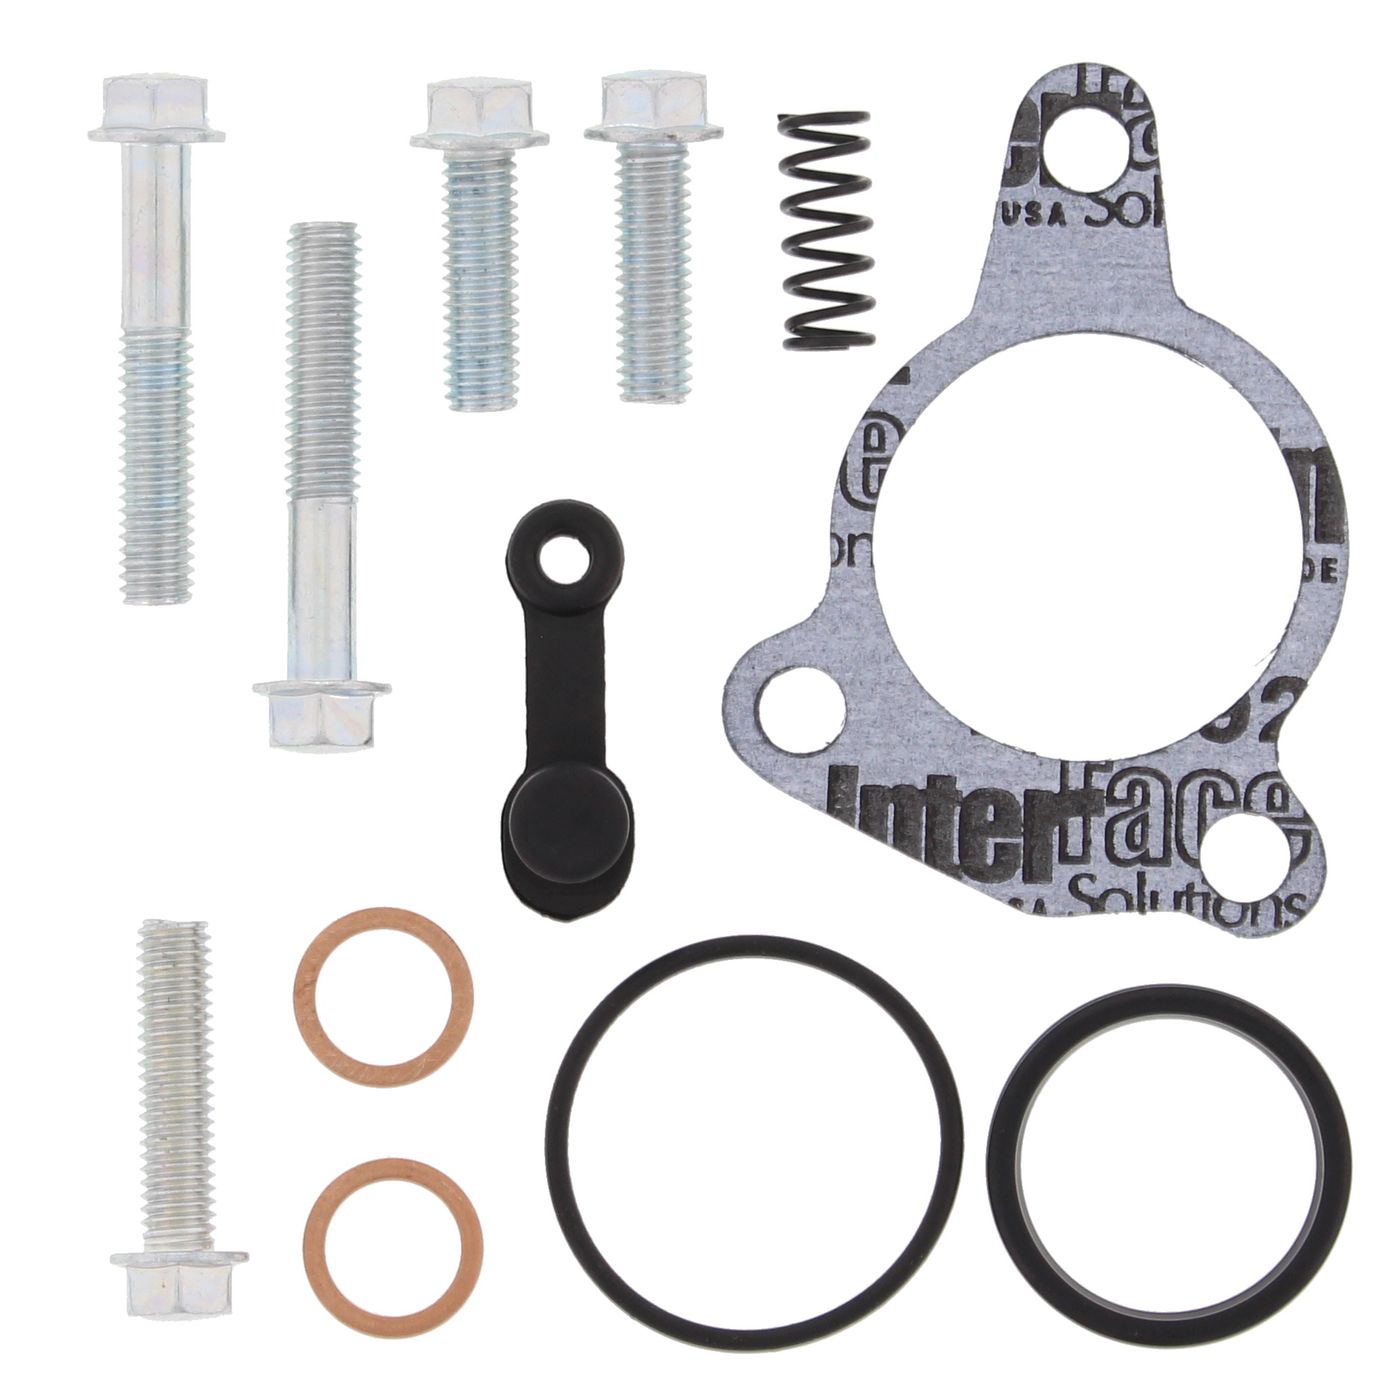 Wrp Clutch Slave Cylinder Kits - WRP186009 image